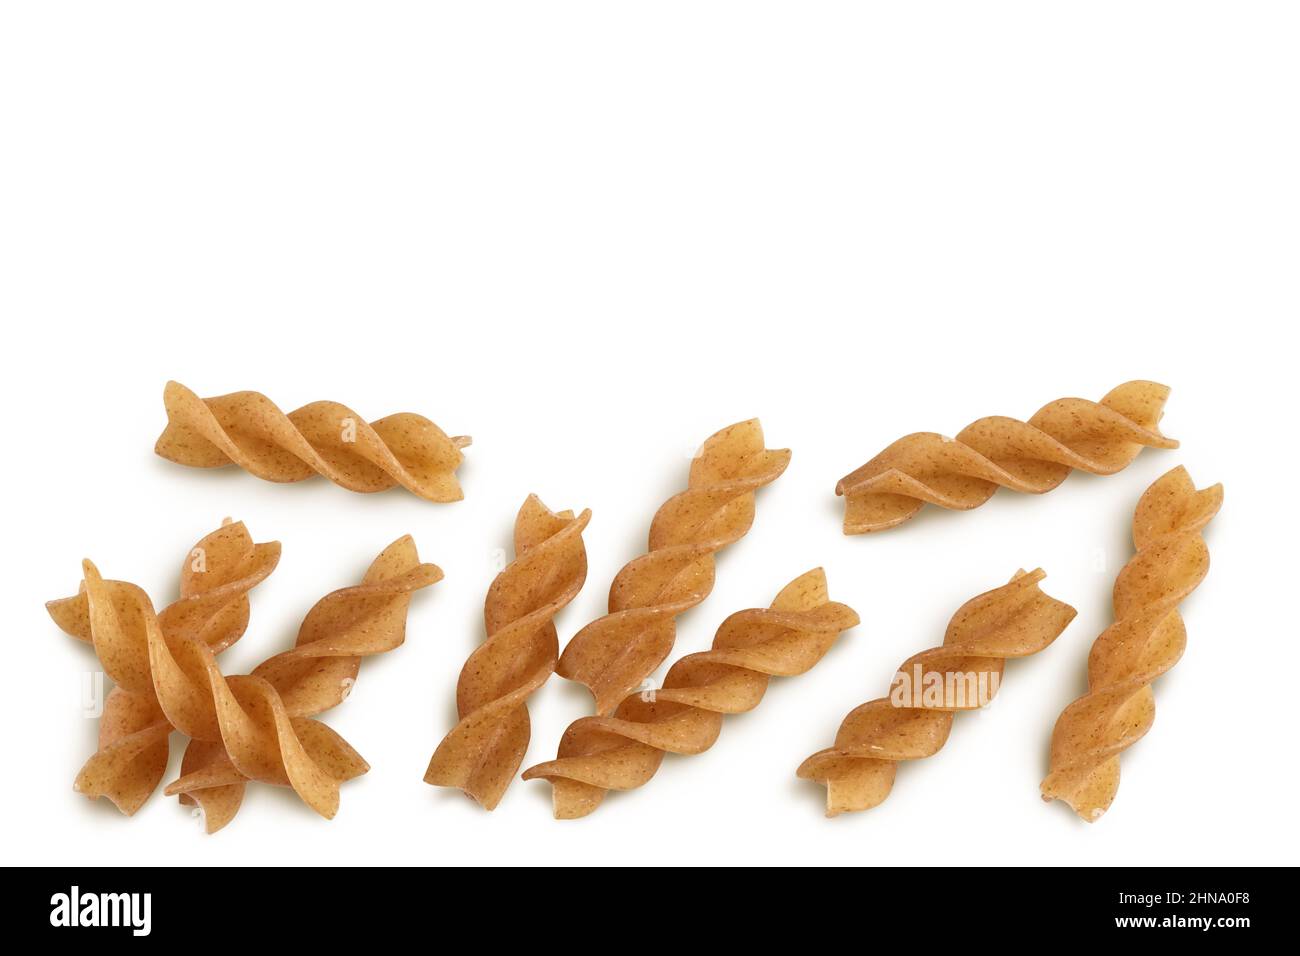 Wolegrain fusilli pasta from durum wheat isolated on white background with clipping path and full depth of field. Top view. Flat lay. Stock Photo